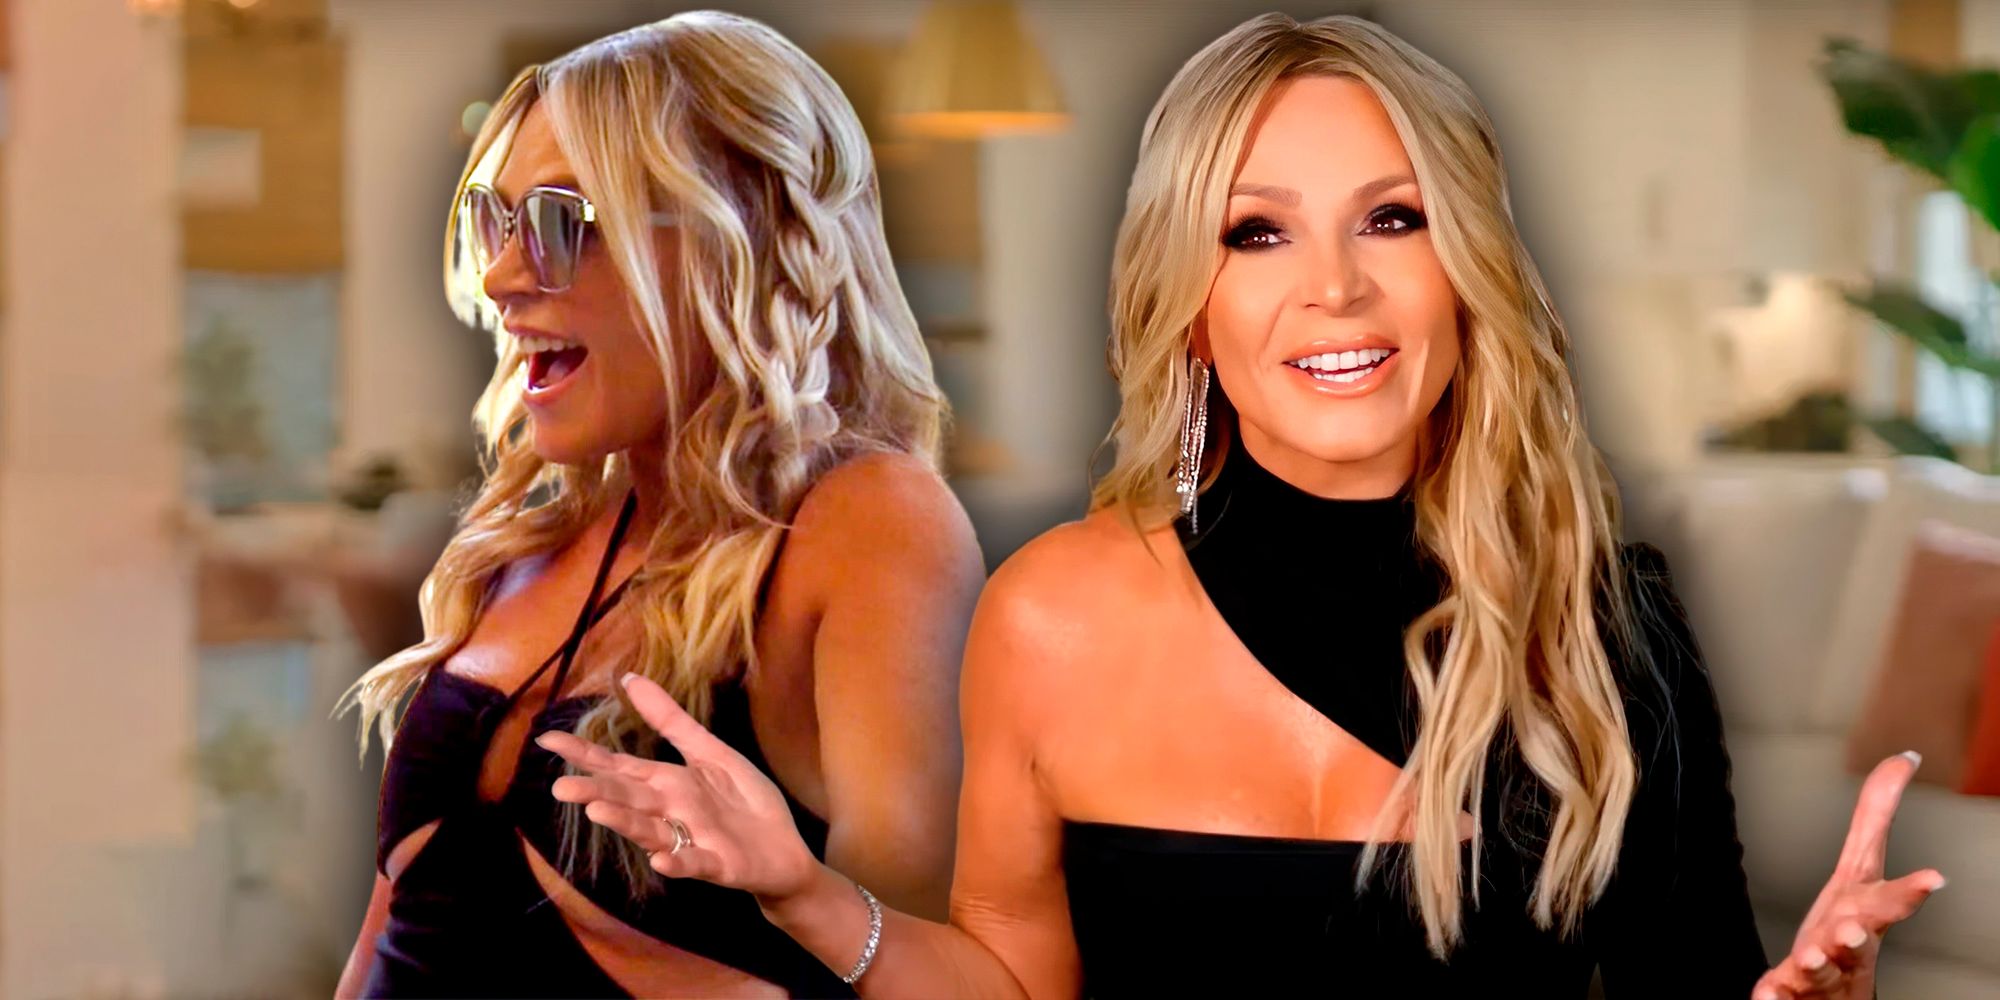 The Real Housewives Of Orange County's Tamra Judge smiling